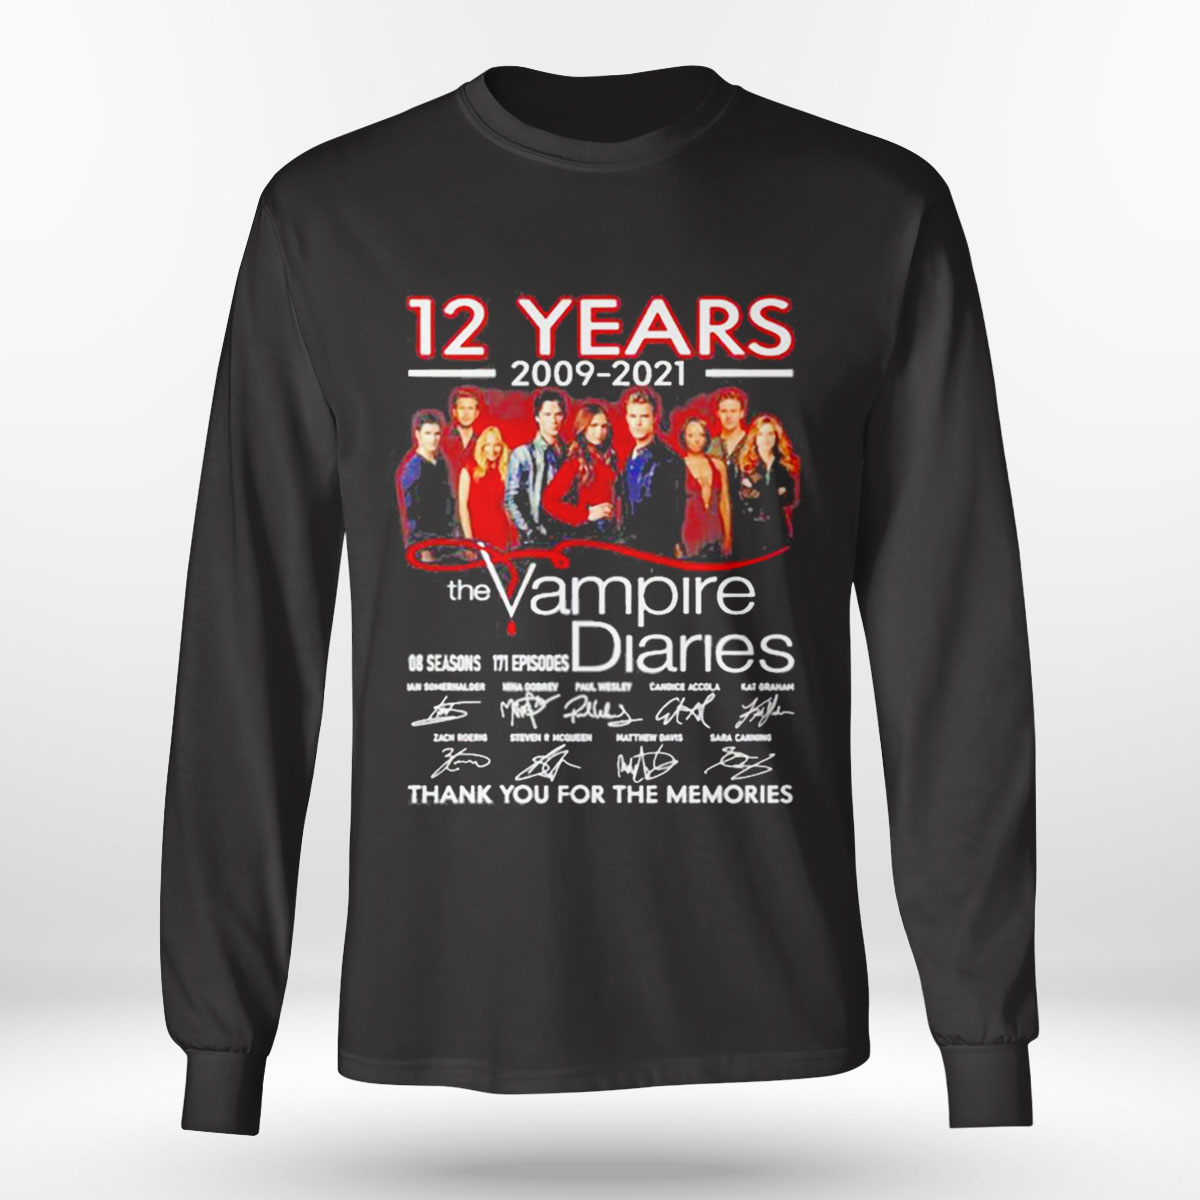 13 Years The Vampire Diaries 8 Season 171 Episodes 2009 2022 Thank You For The Memories Shirt Long Sleeve, Ladies Tee